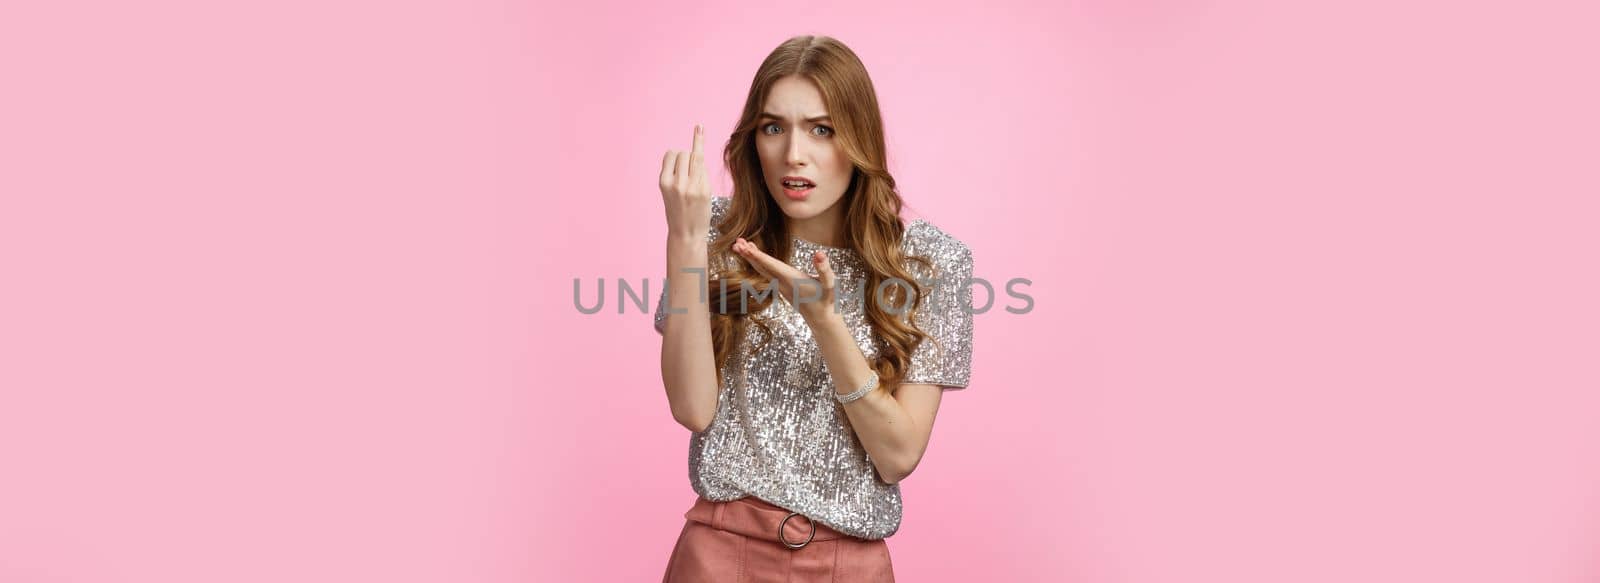 Glamour pissed girlfriend arguing boyfriend questioned bothered when wedding showing ring finger frustrated upset man commitment issues, wanna marry, ask when become bride, standing pink background.